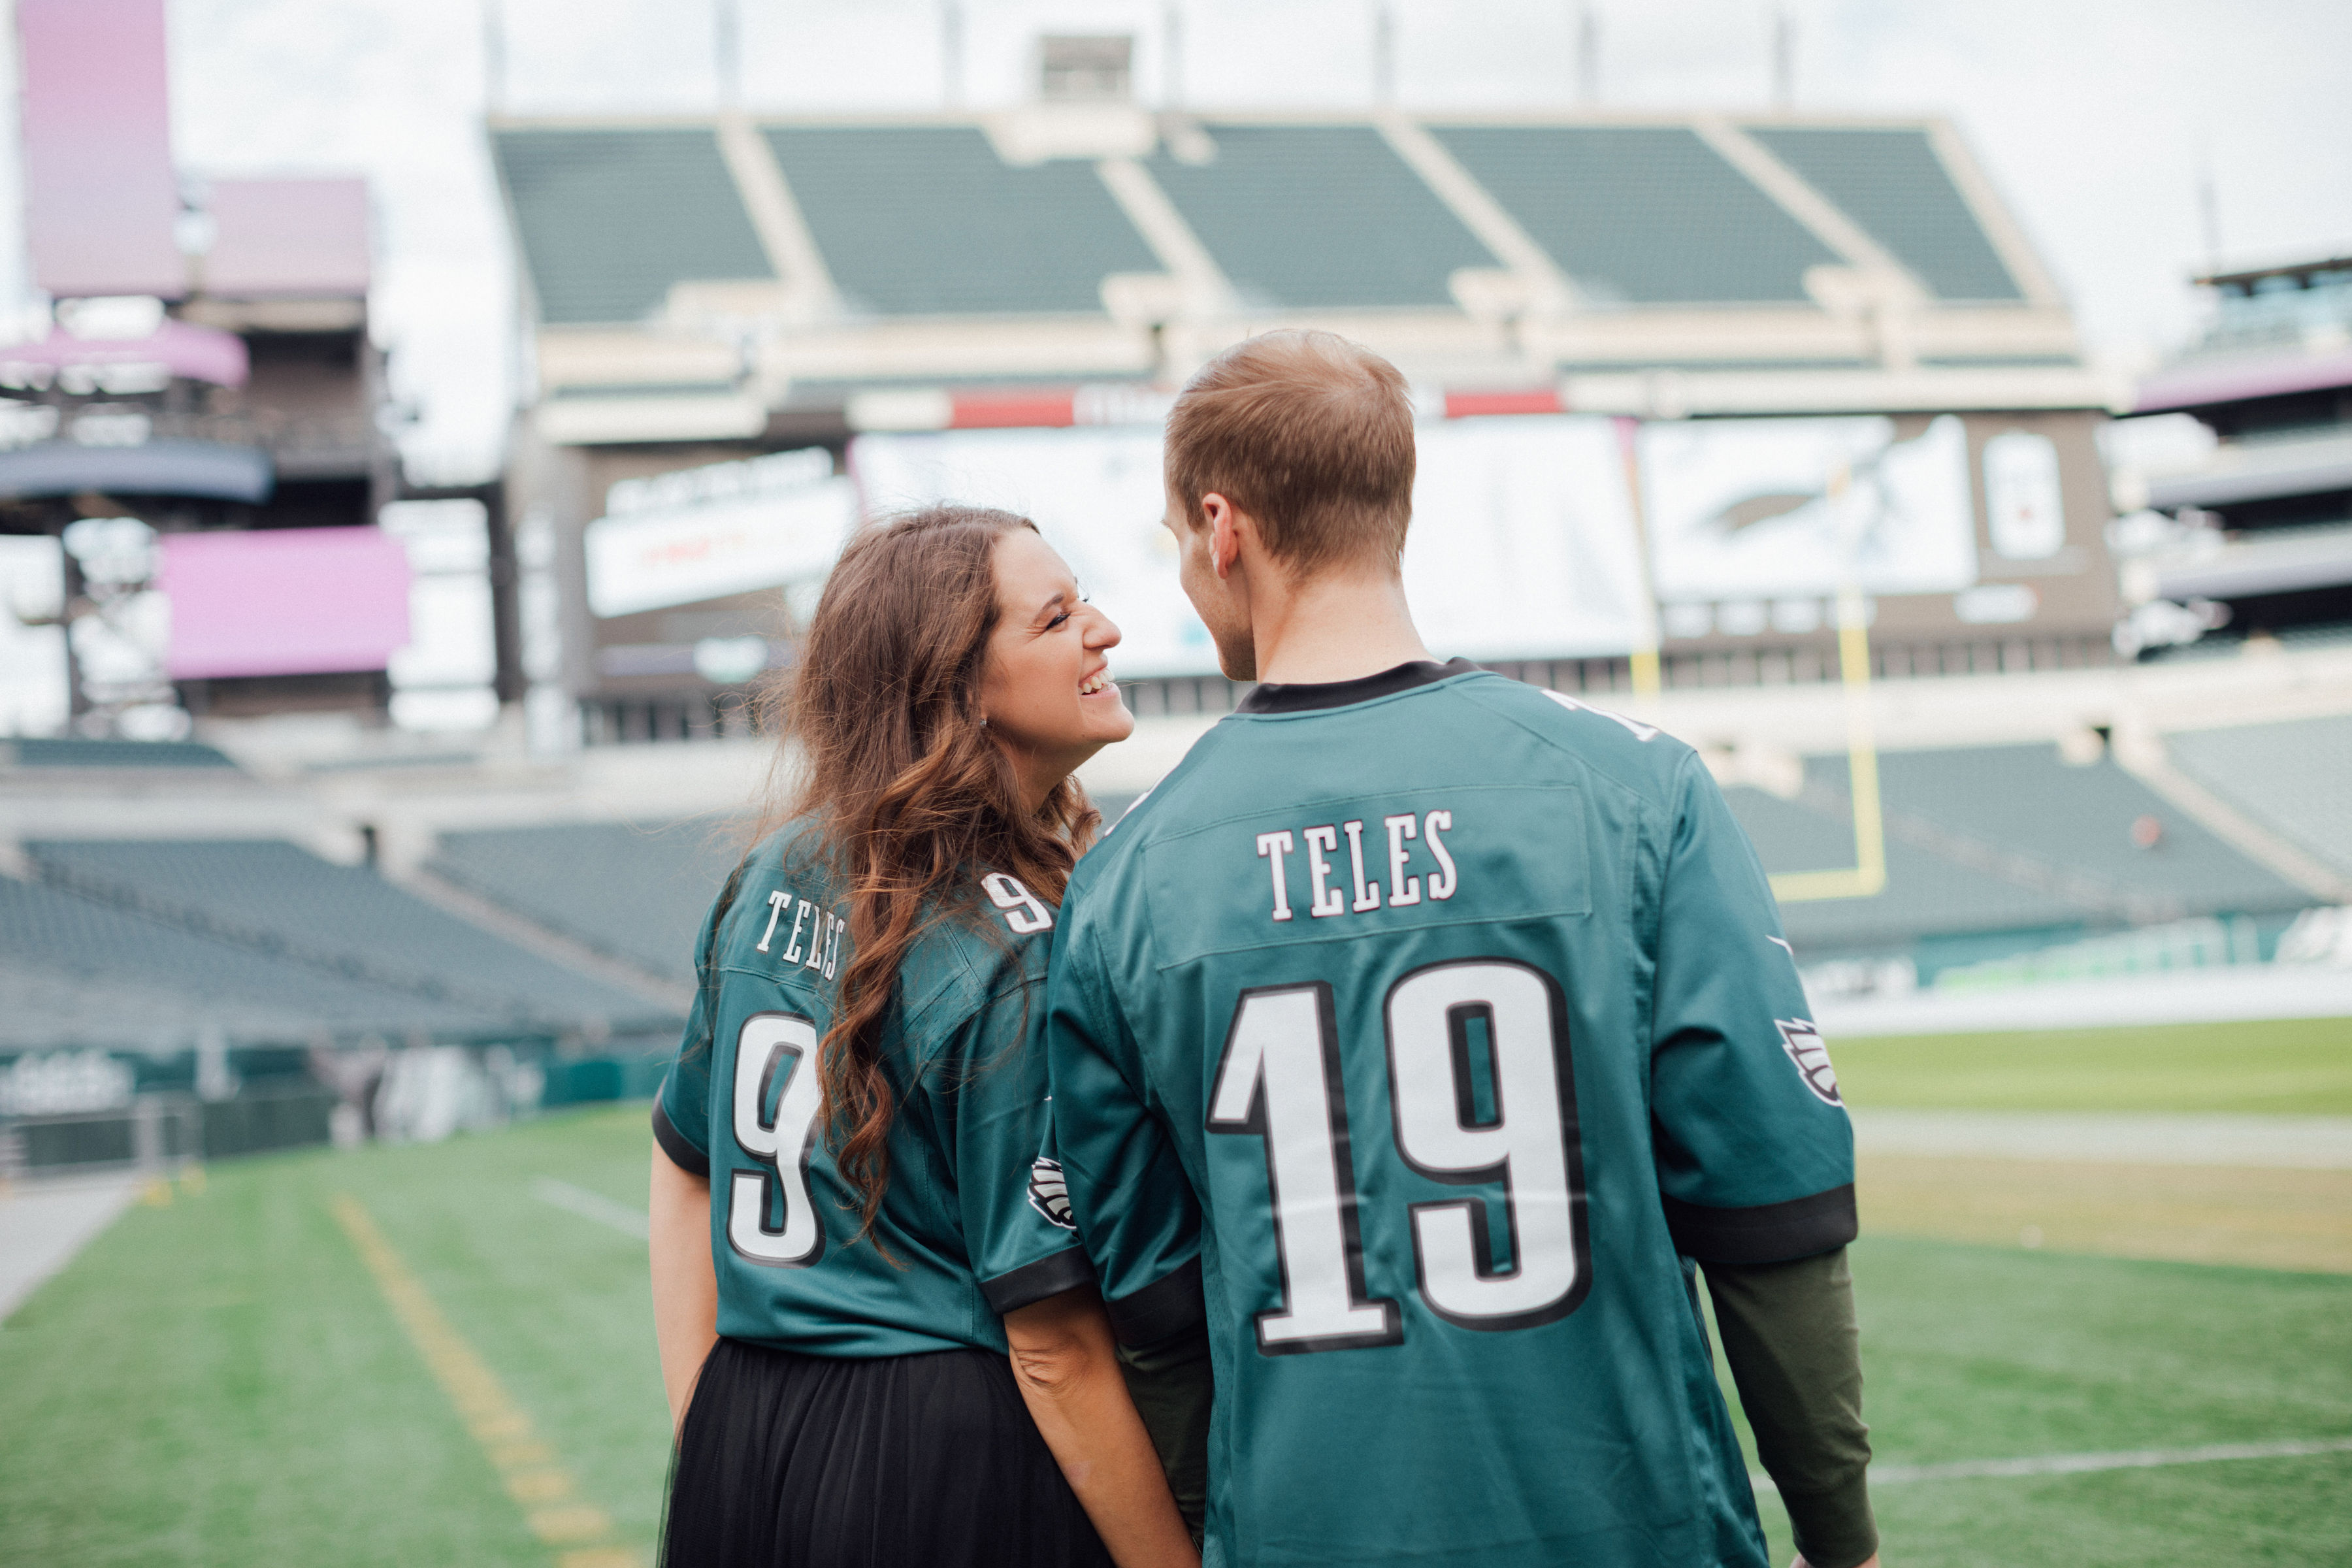 couple smiling on football field